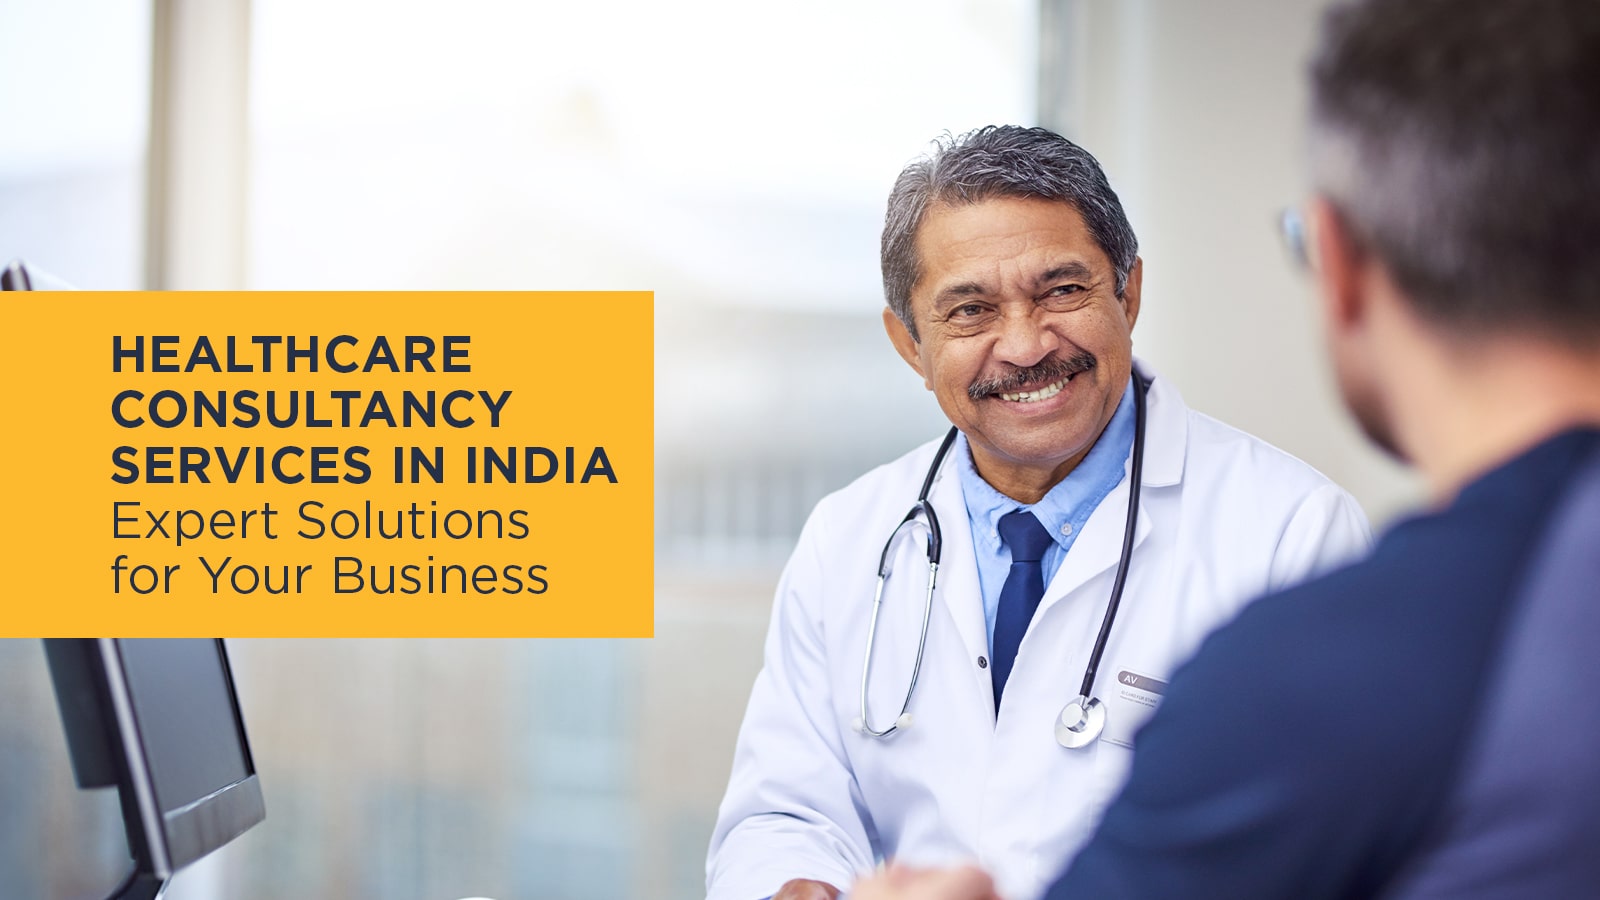 Healthcare Consultancy Services in India